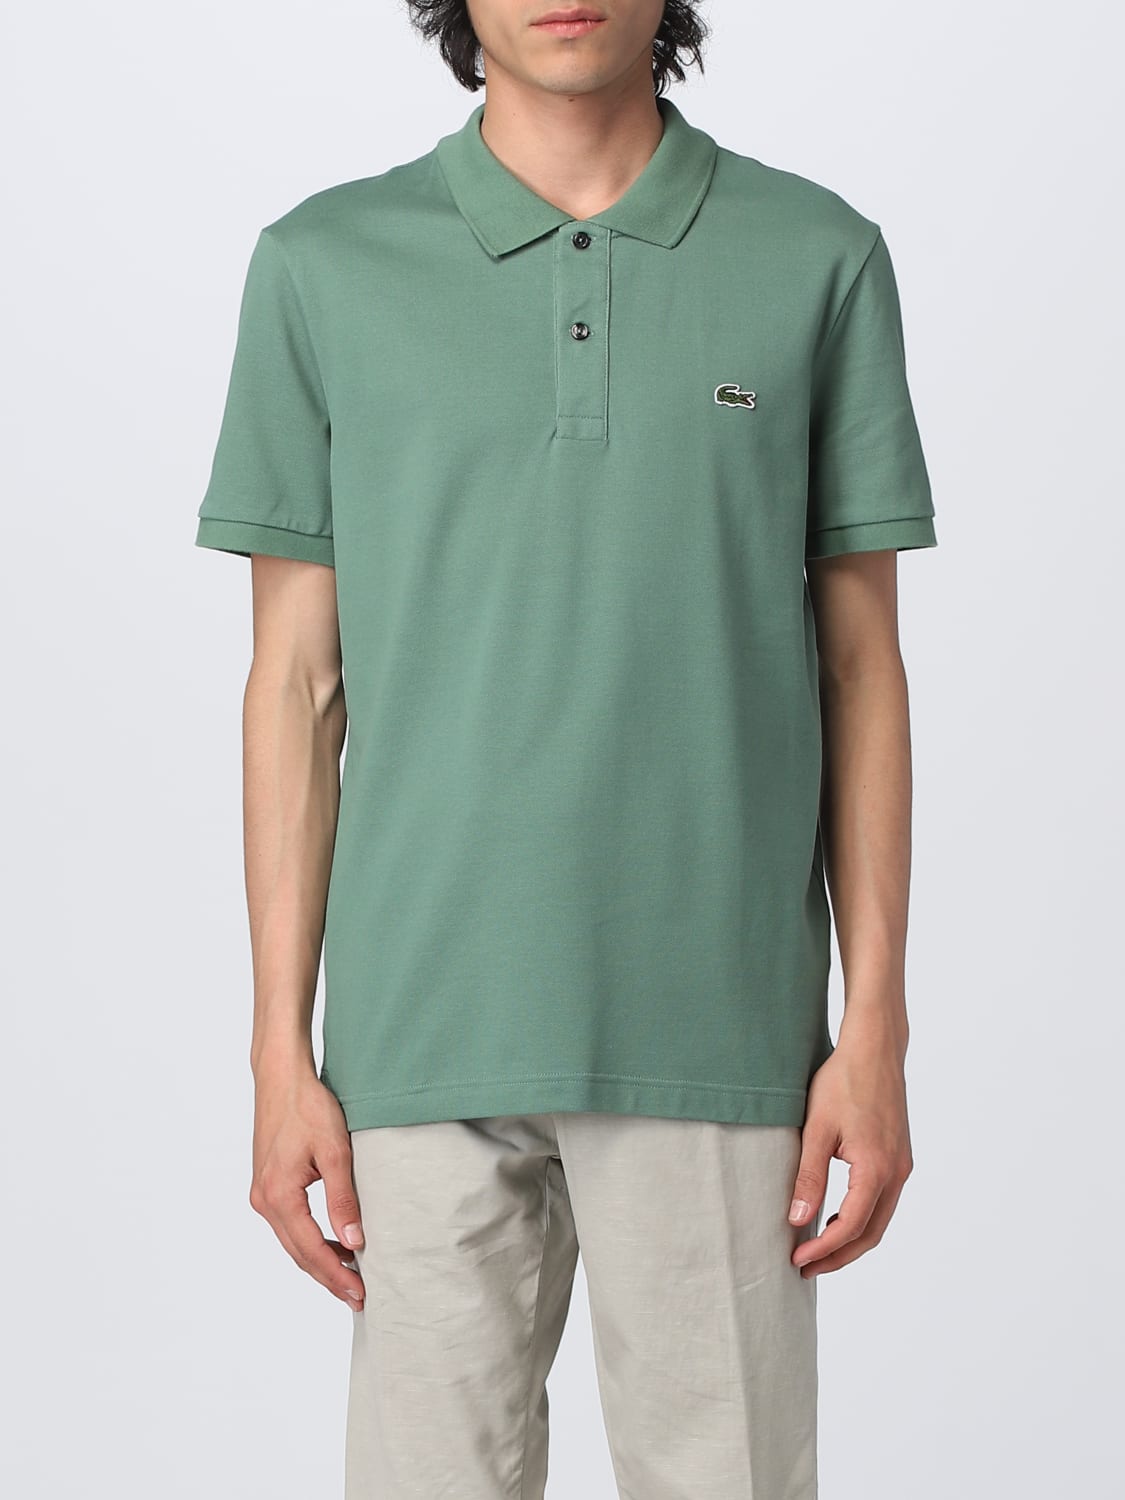 LACOSTE: polo shirt for man - Green | Lacoste shirt PH4012 online on GIGLIO.COM